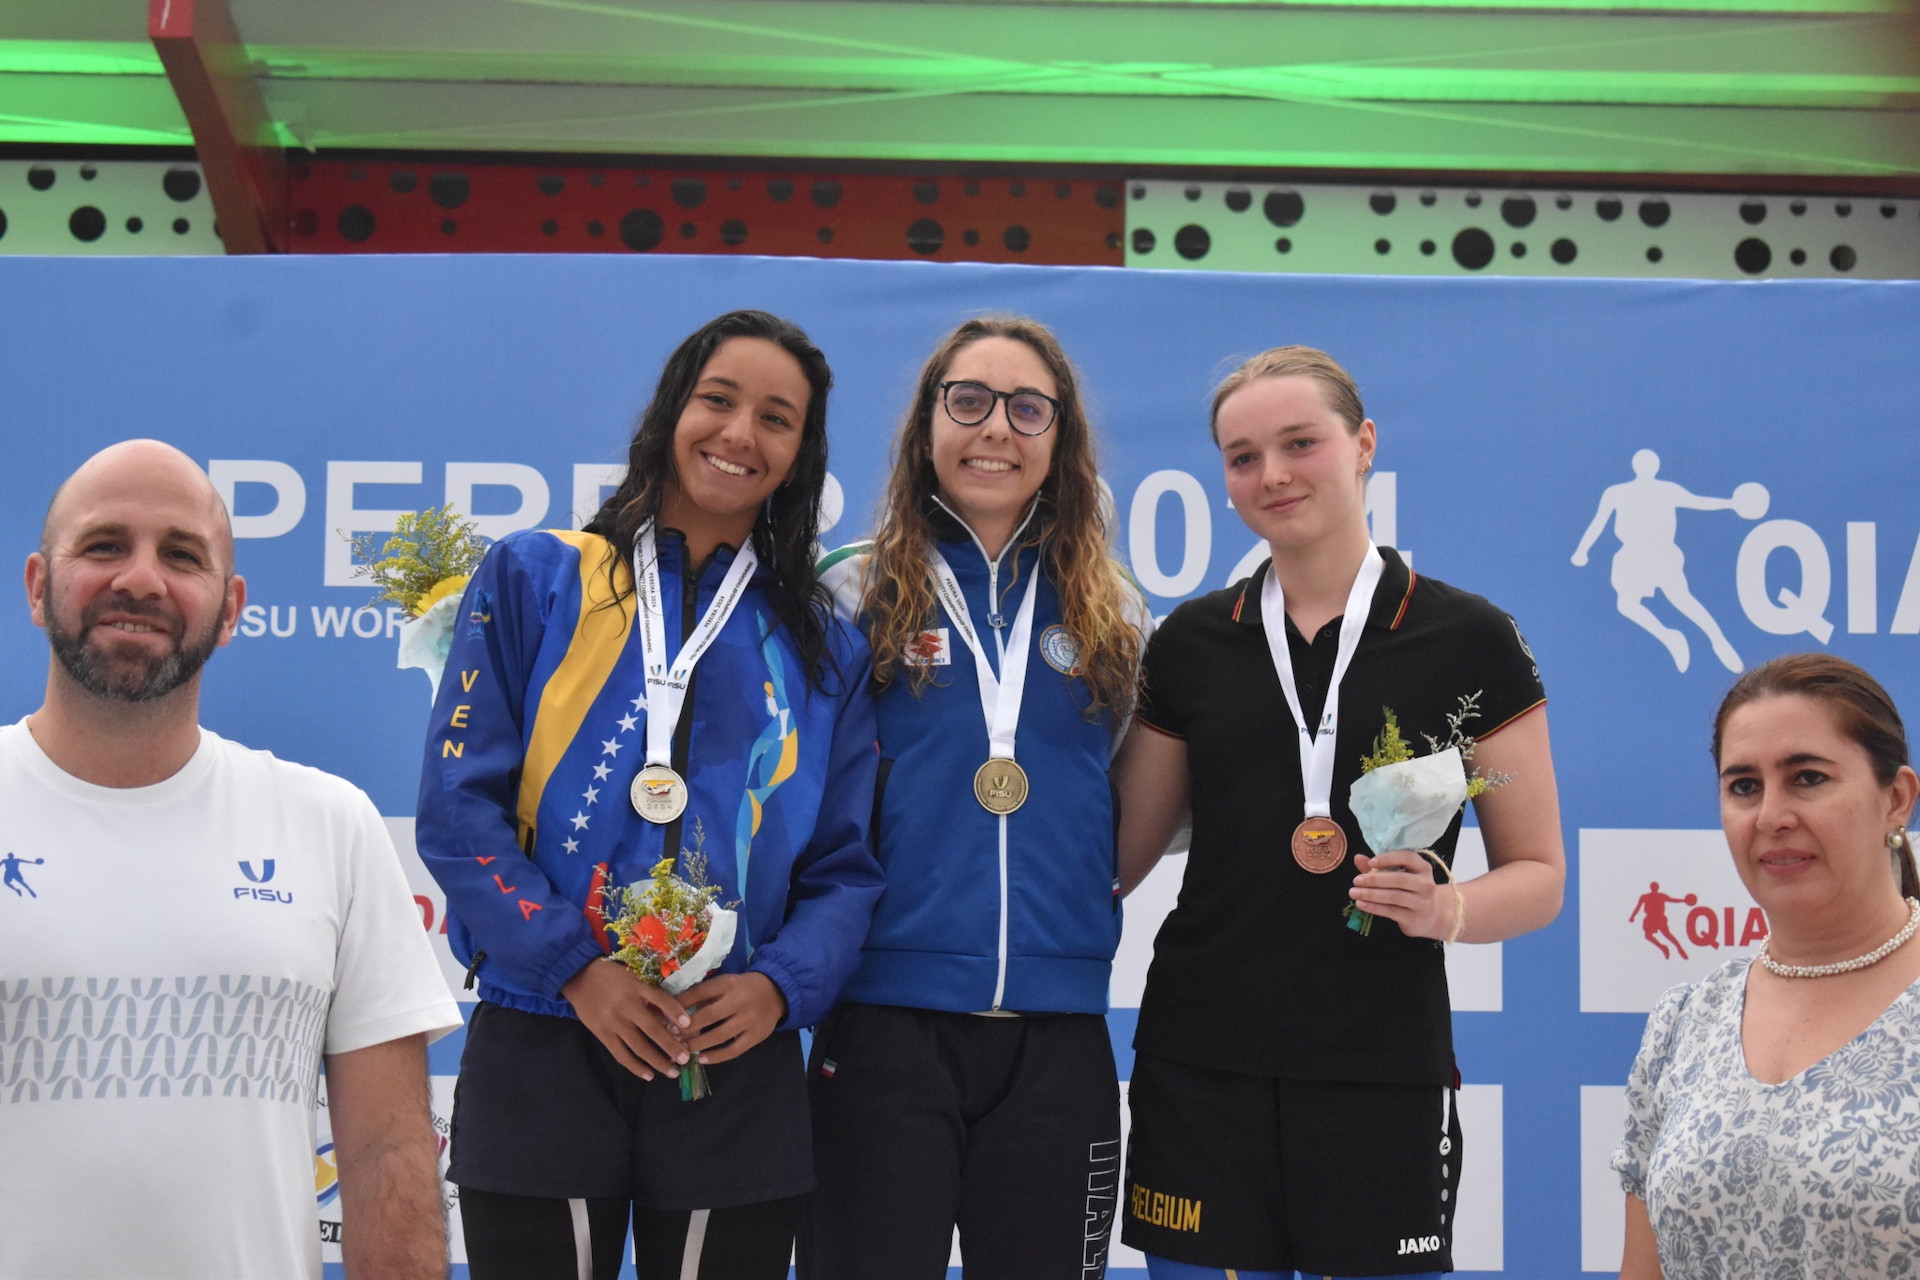 The student-athletes proudly show off their medals. FISU